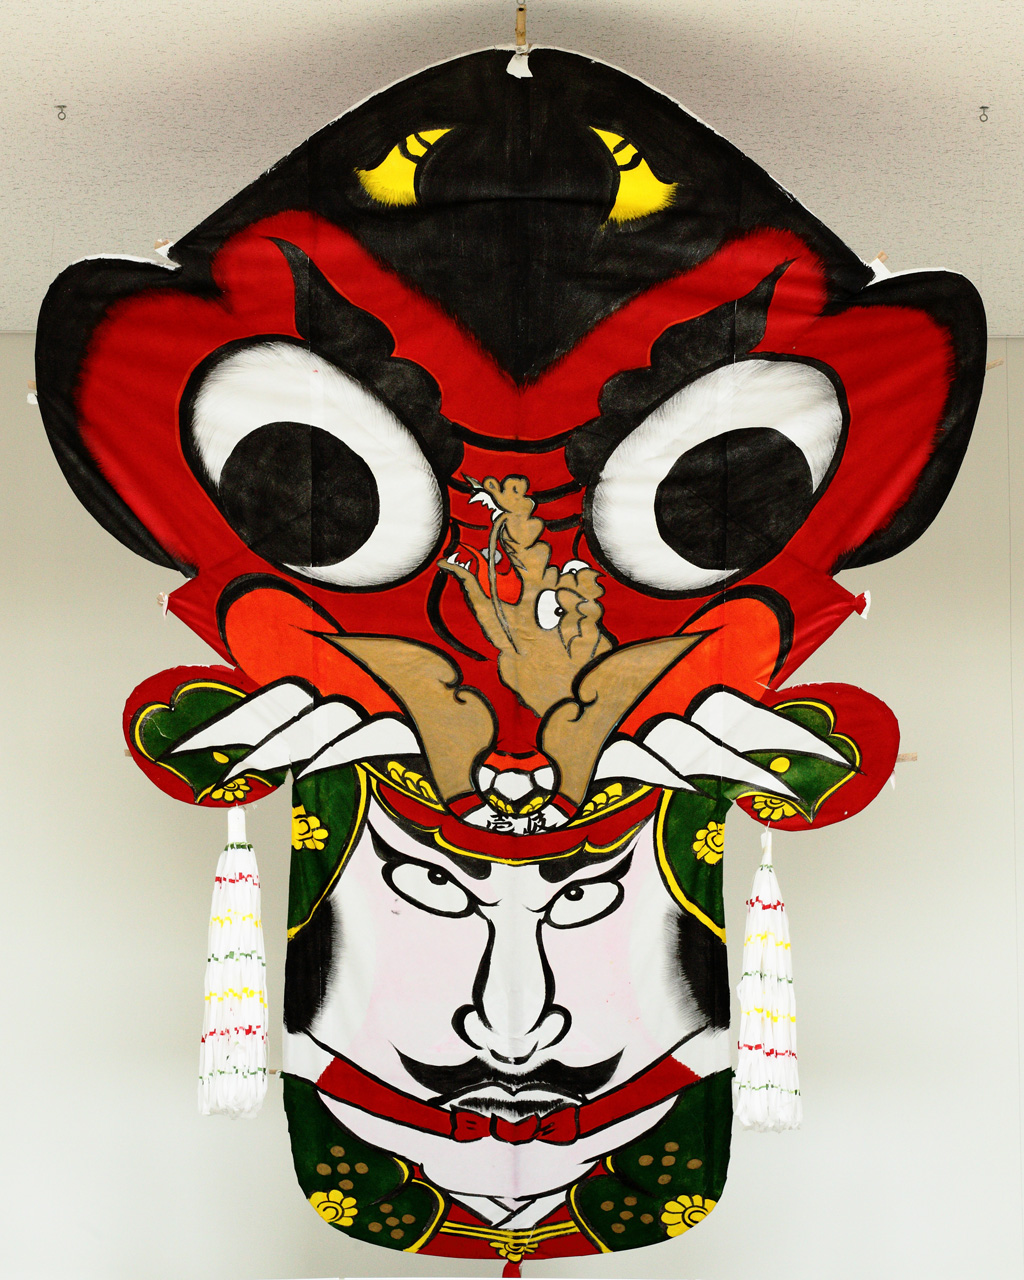 this is a decoration of a demon mask